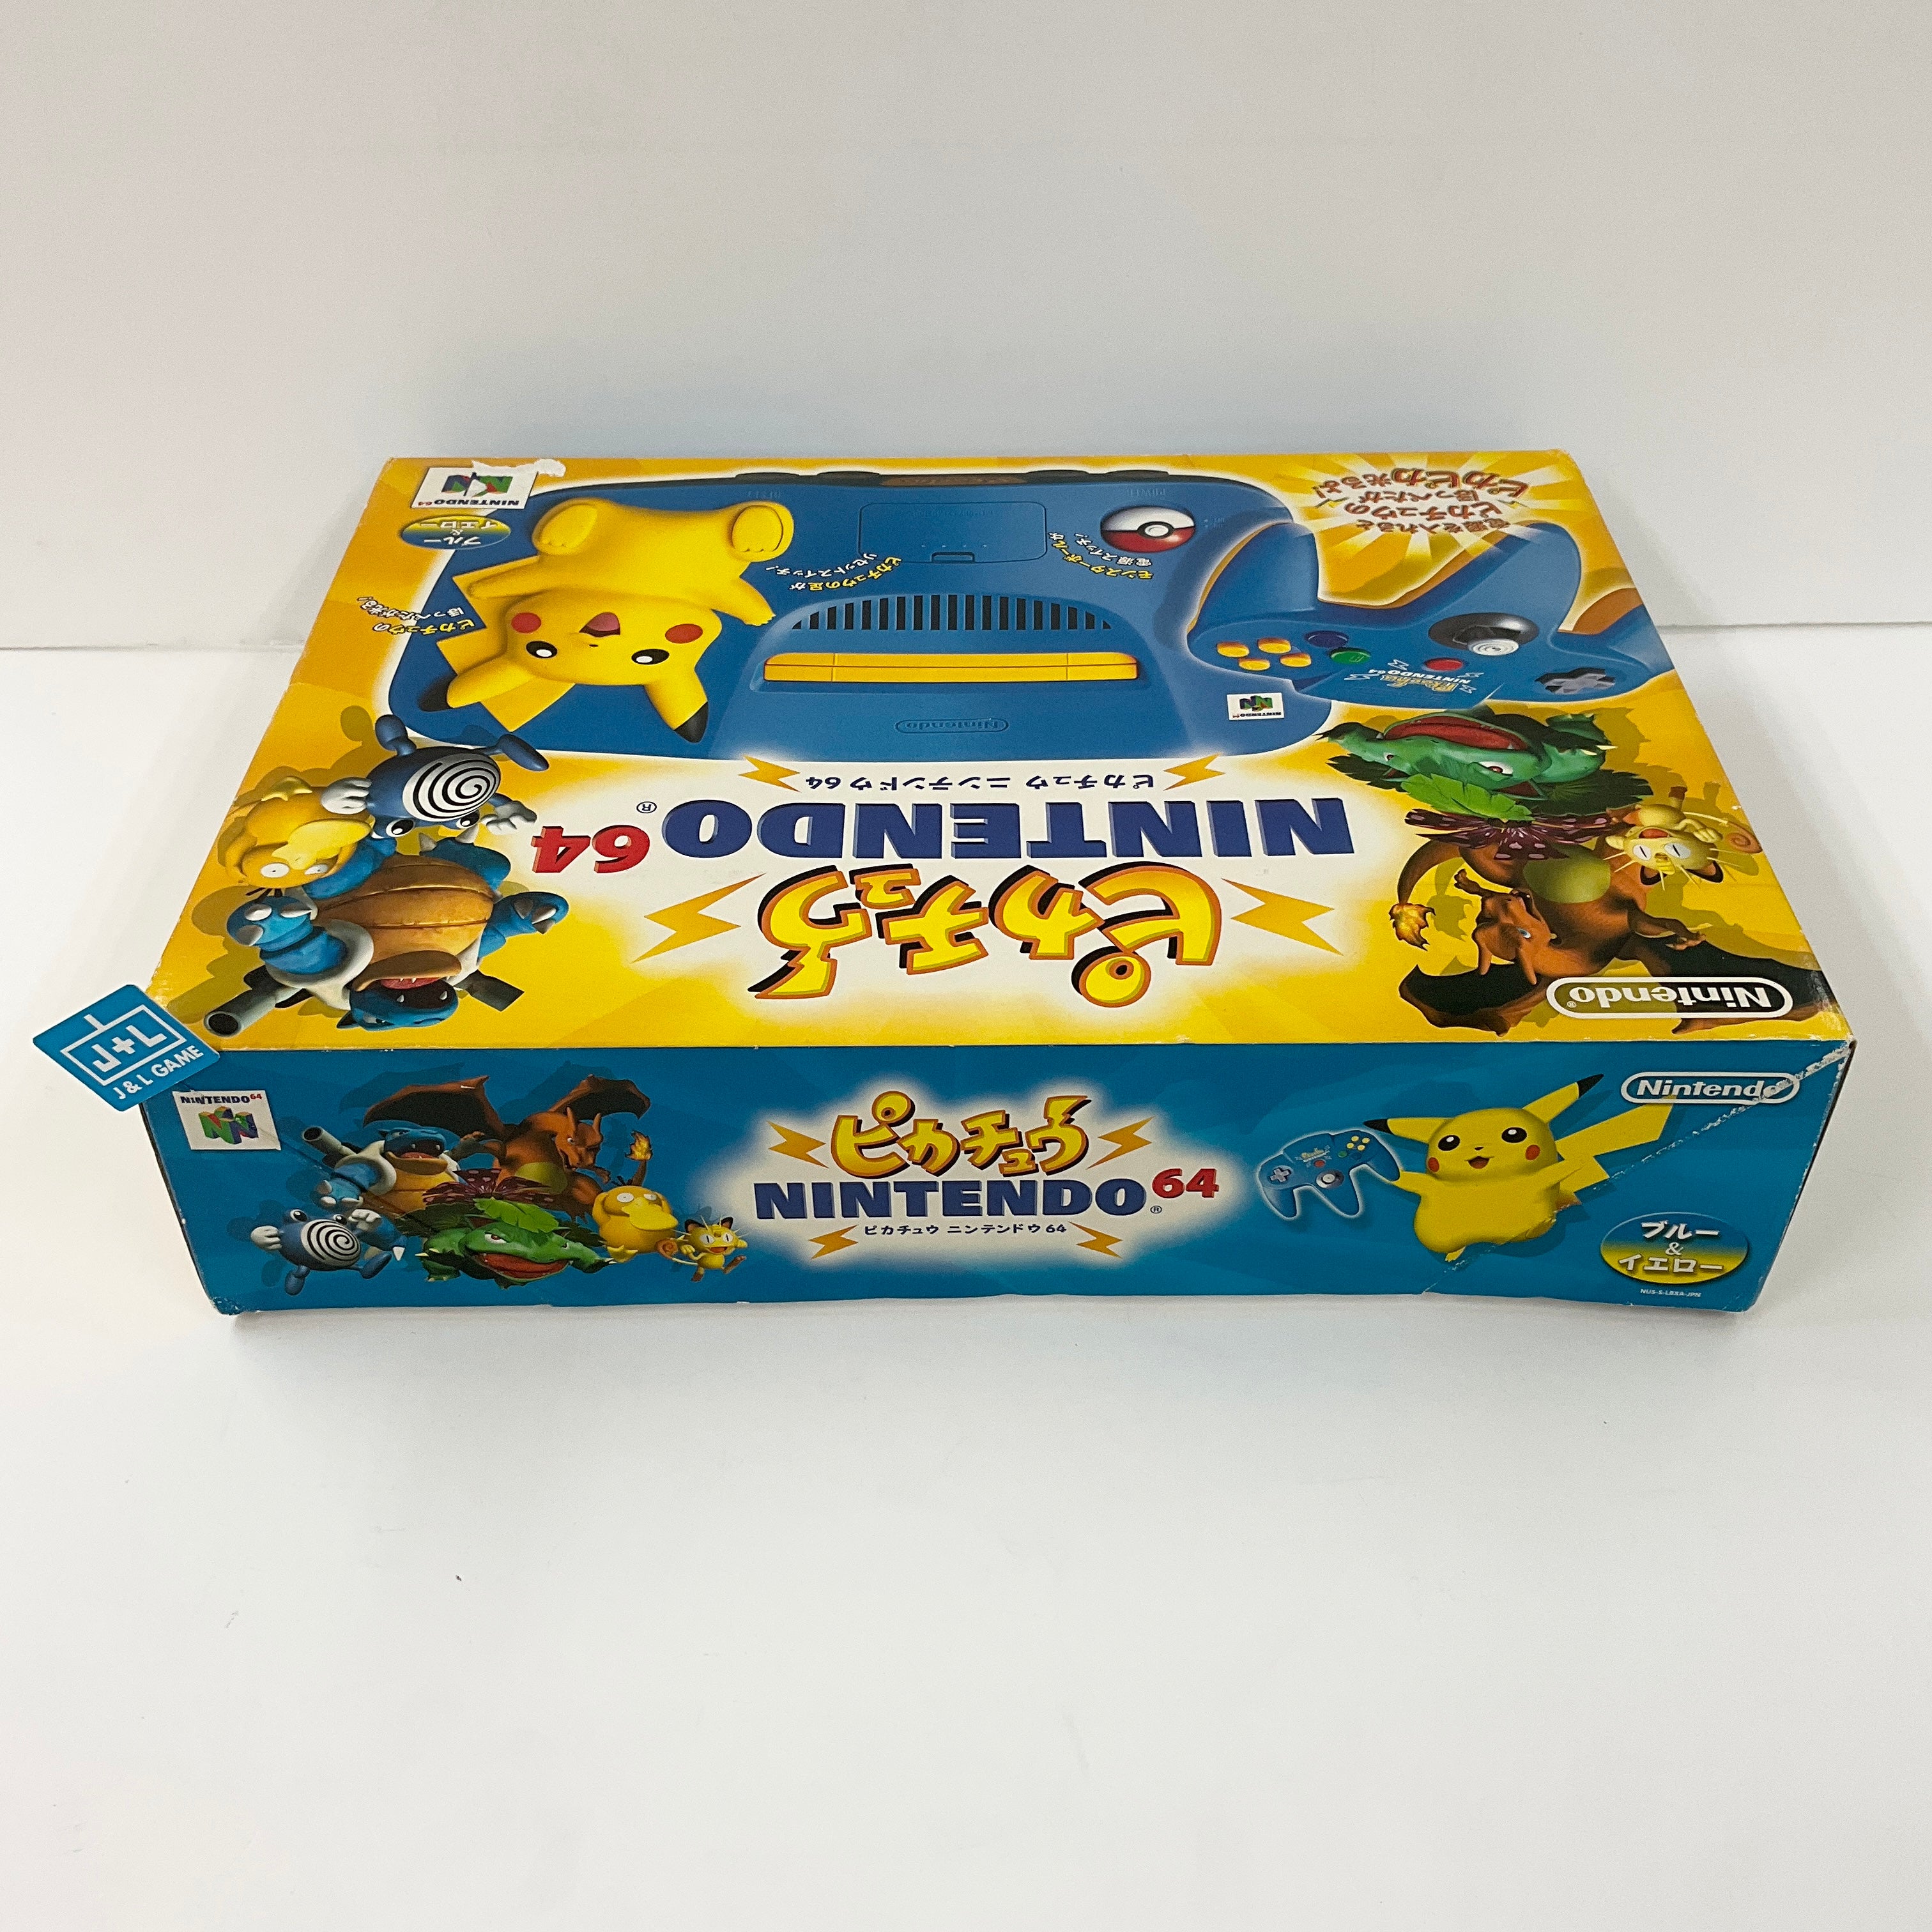 Nintendo 64 Hardware Console (Pikachu Edition) (Blue and Yellow) - (N64) Nintendo 64 [Pre-Owned] (Japanese Import) CONSOLE Nintendo   